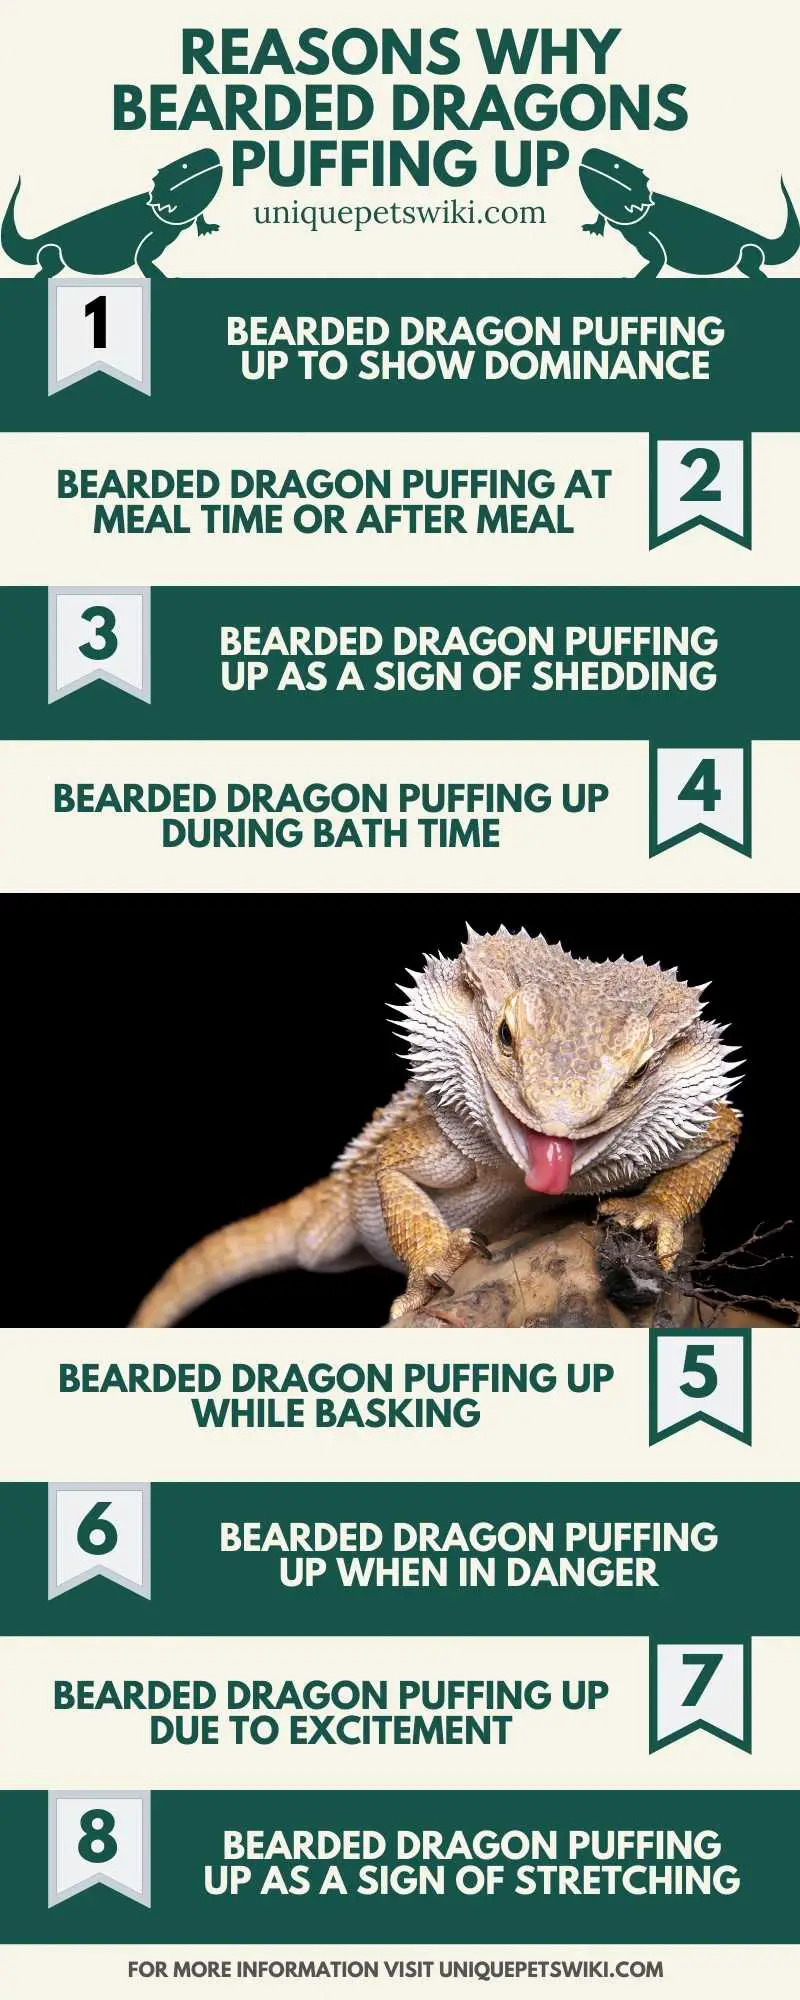 Bearded Dragons Puffing Up Reasons Infographics